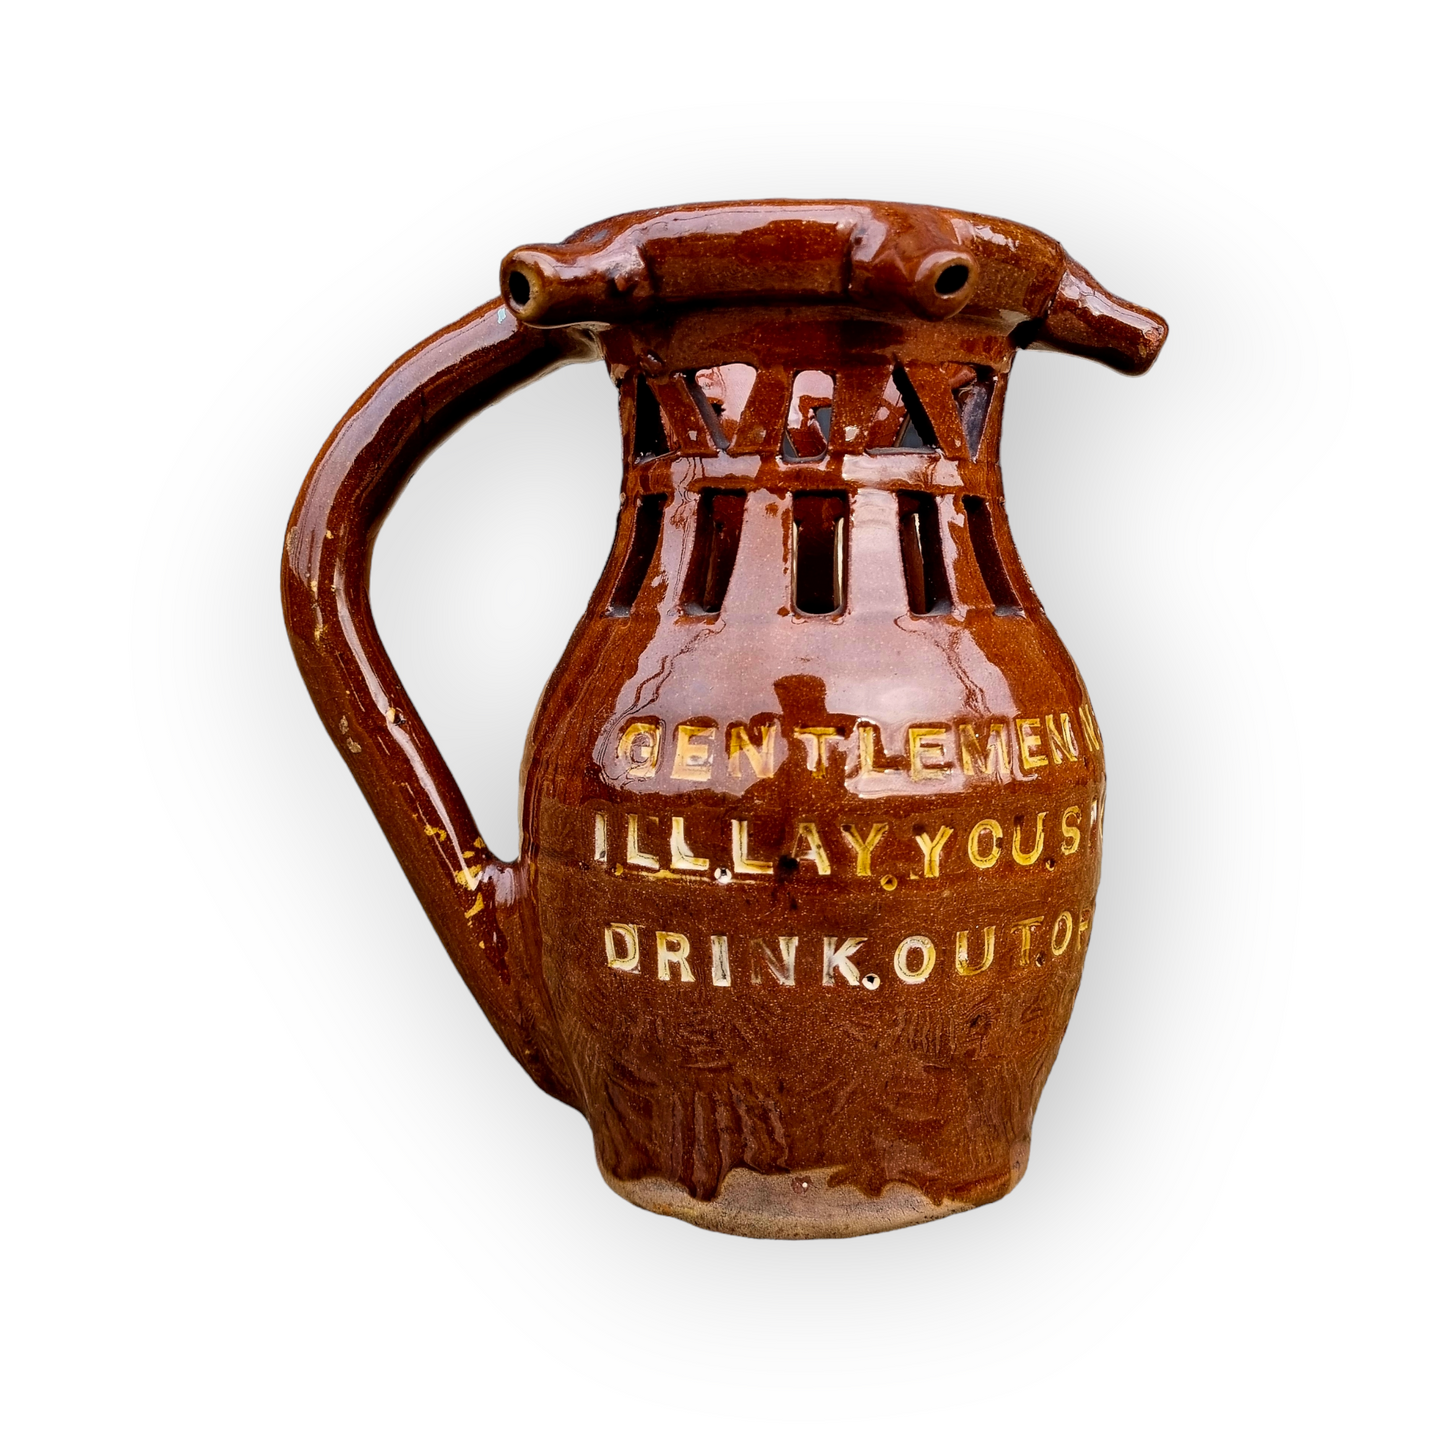 Late 19th Century English Antique Earthenware Puzzle Jug Dated "1887"